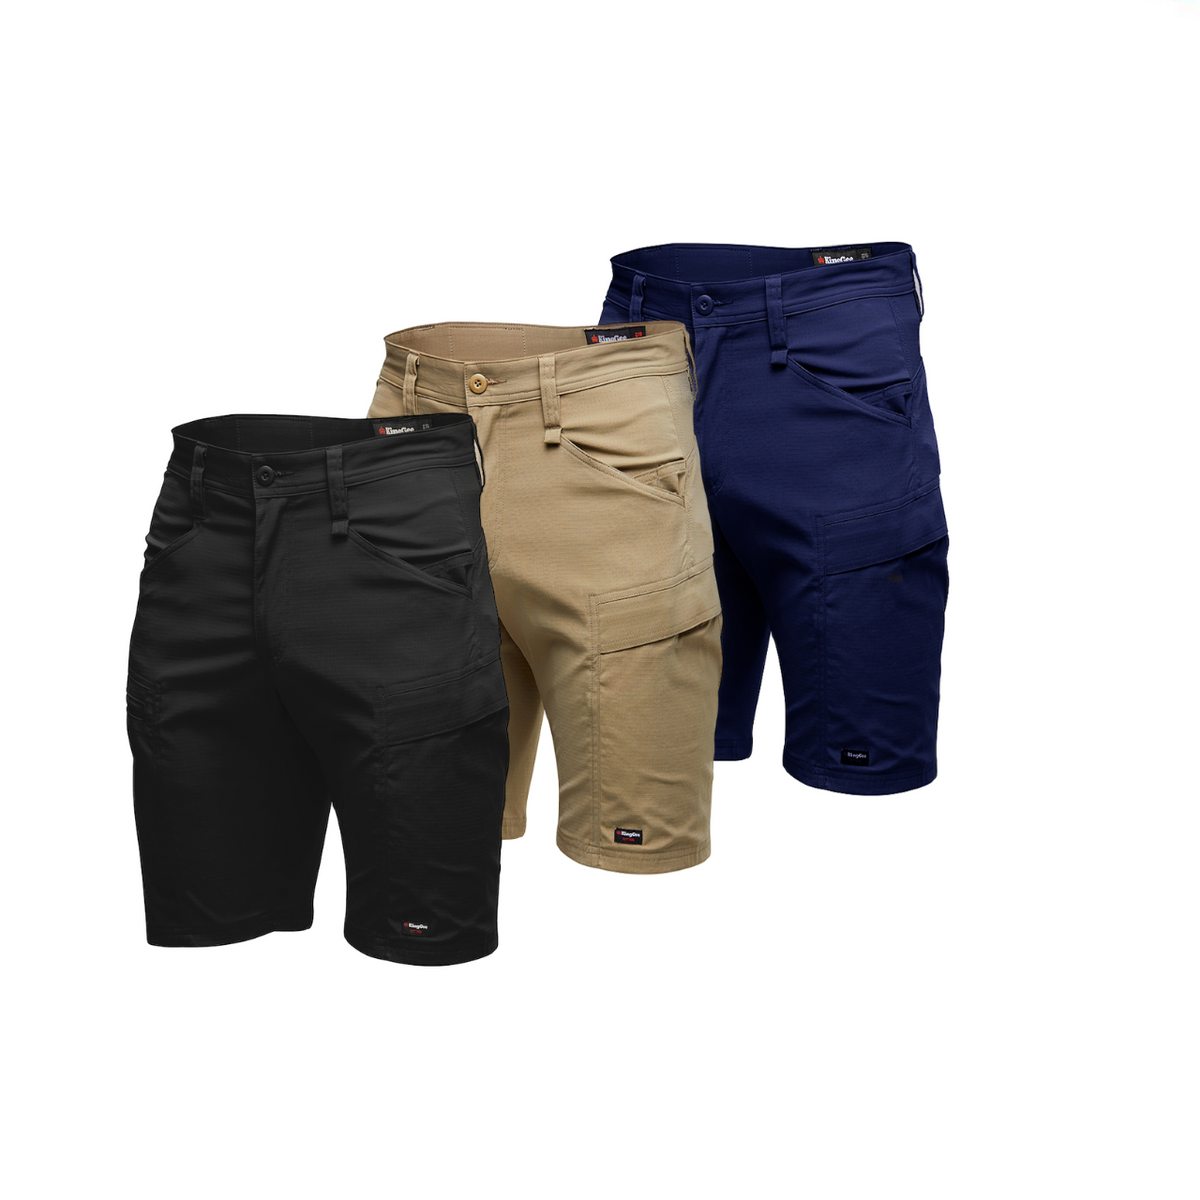 KingGee Mens KingGee Drycool Shorts Stretch Ripstop Cargo Light Work K17013-Collins Clothing Co